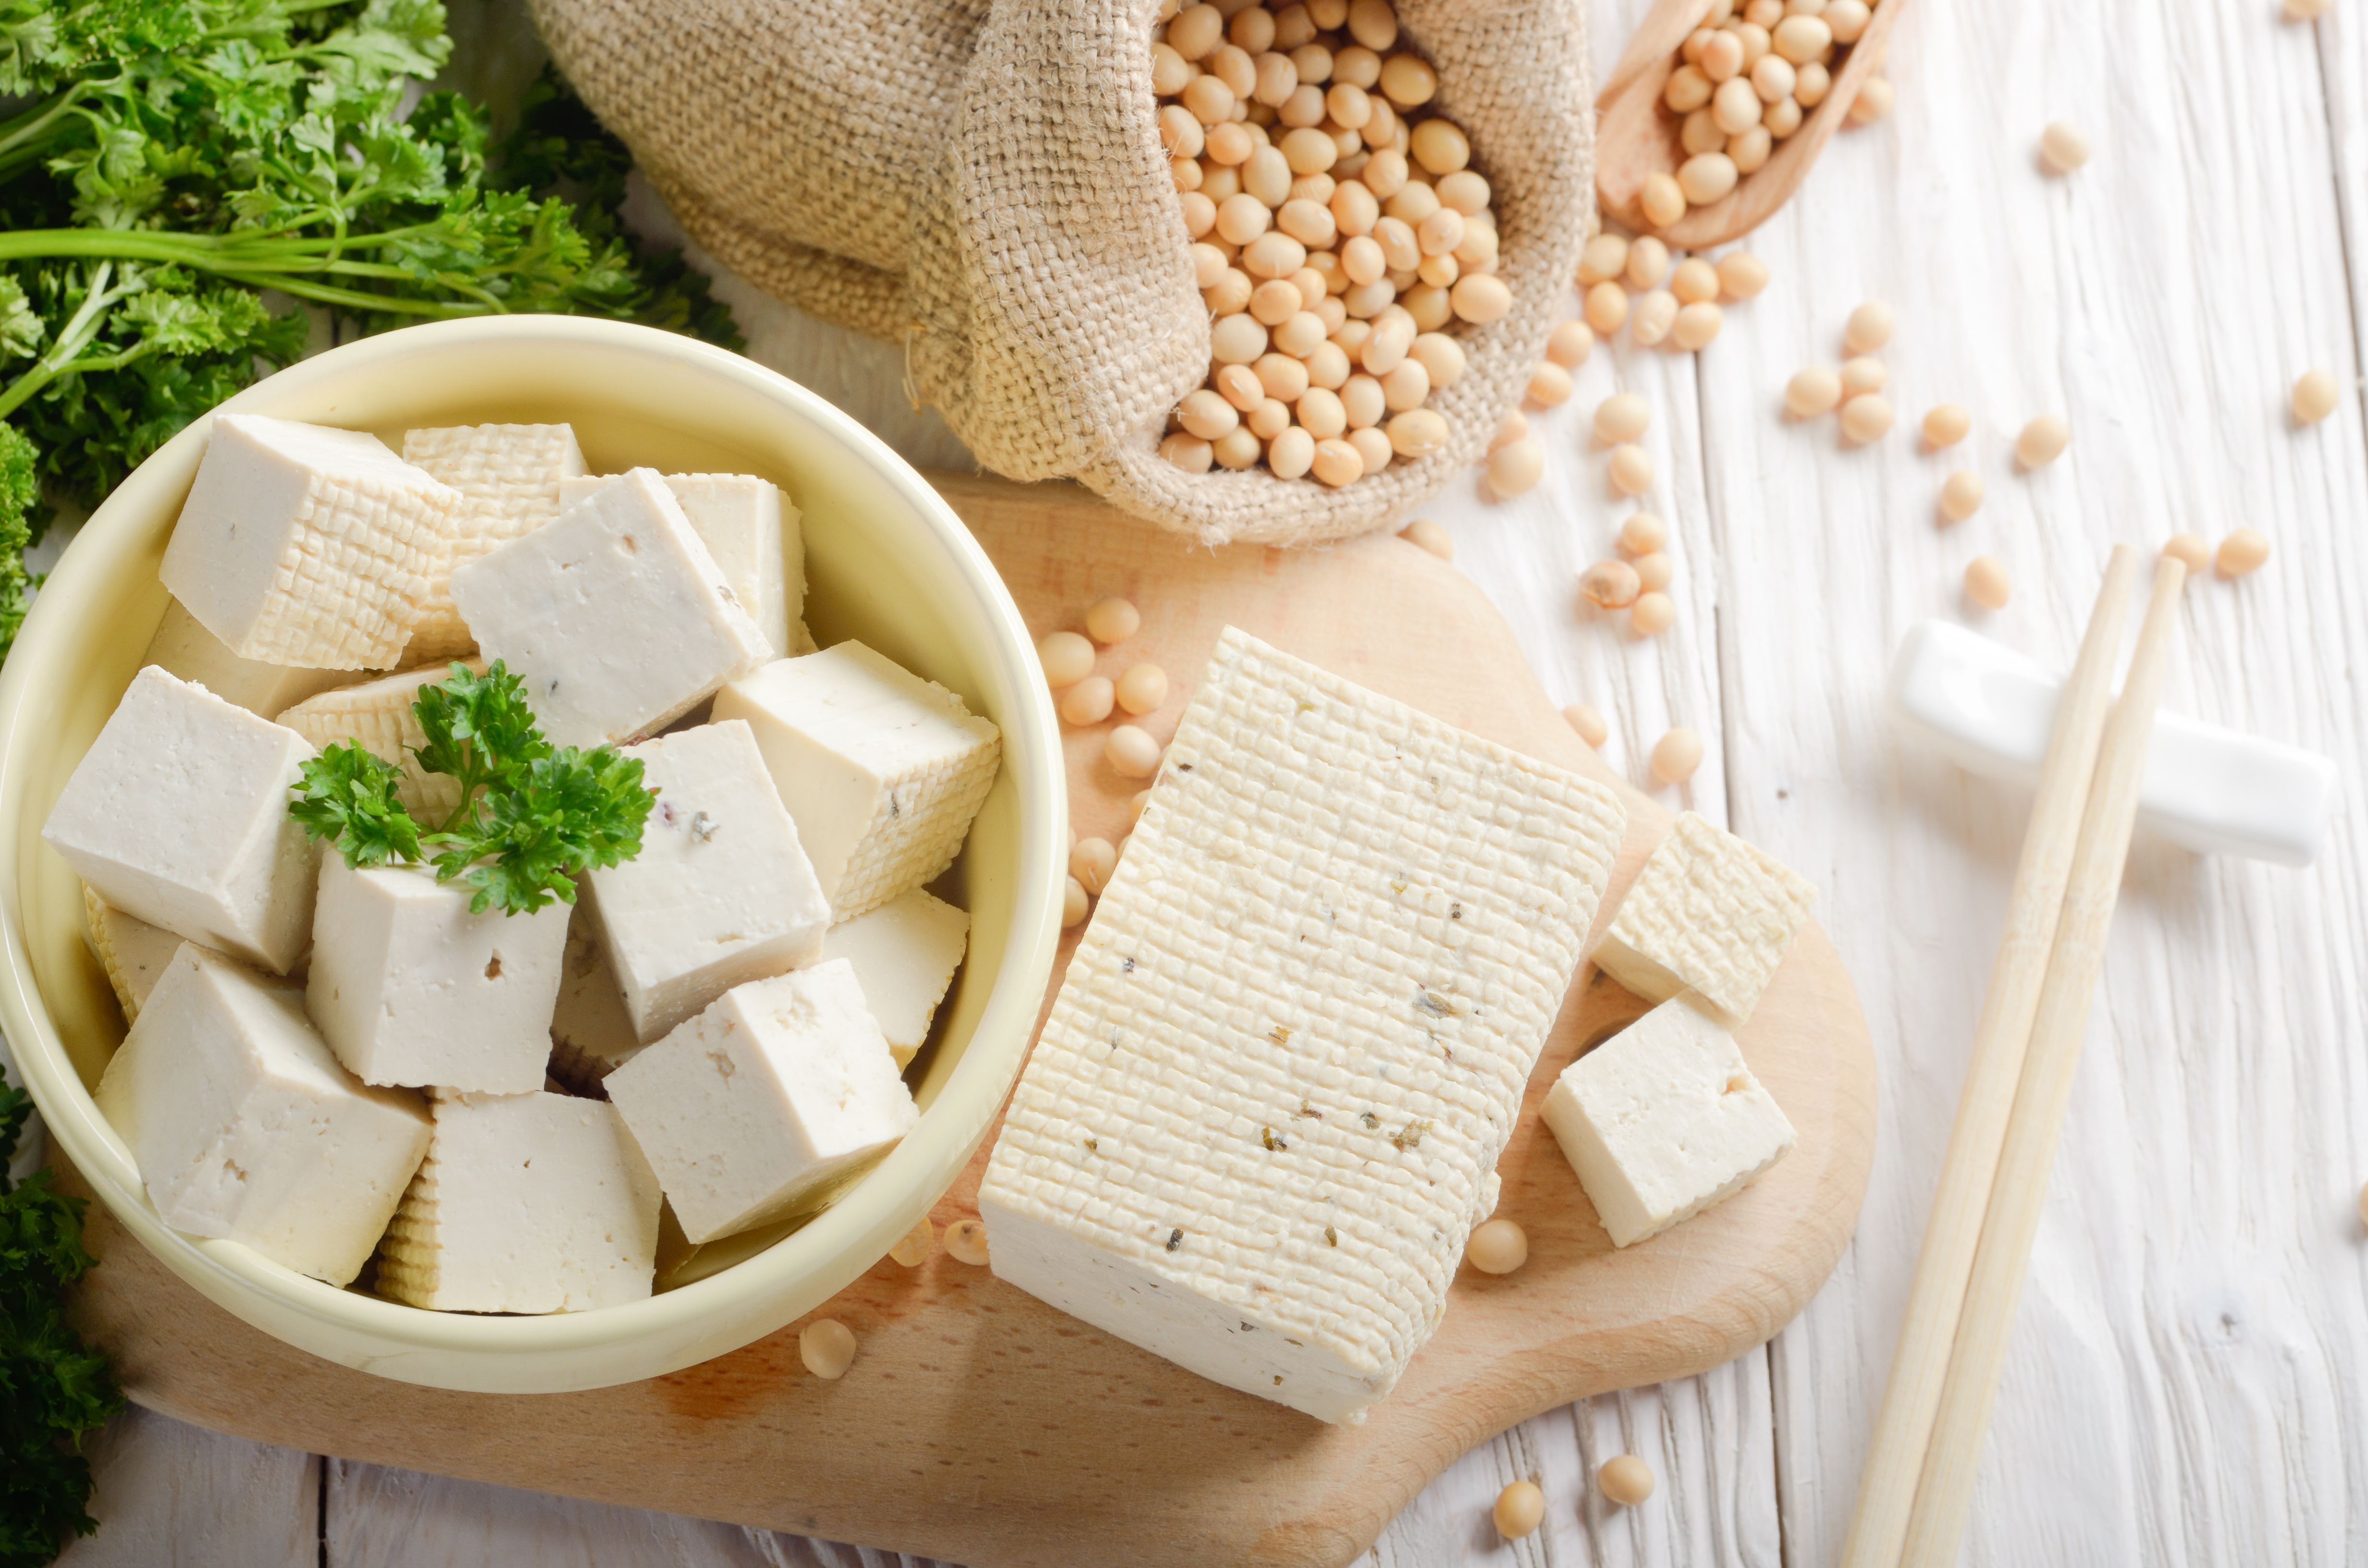 Transitioning to vegetarianism? Instead of eliminating meat, start by adding an array of foods to your diet — like tofu.